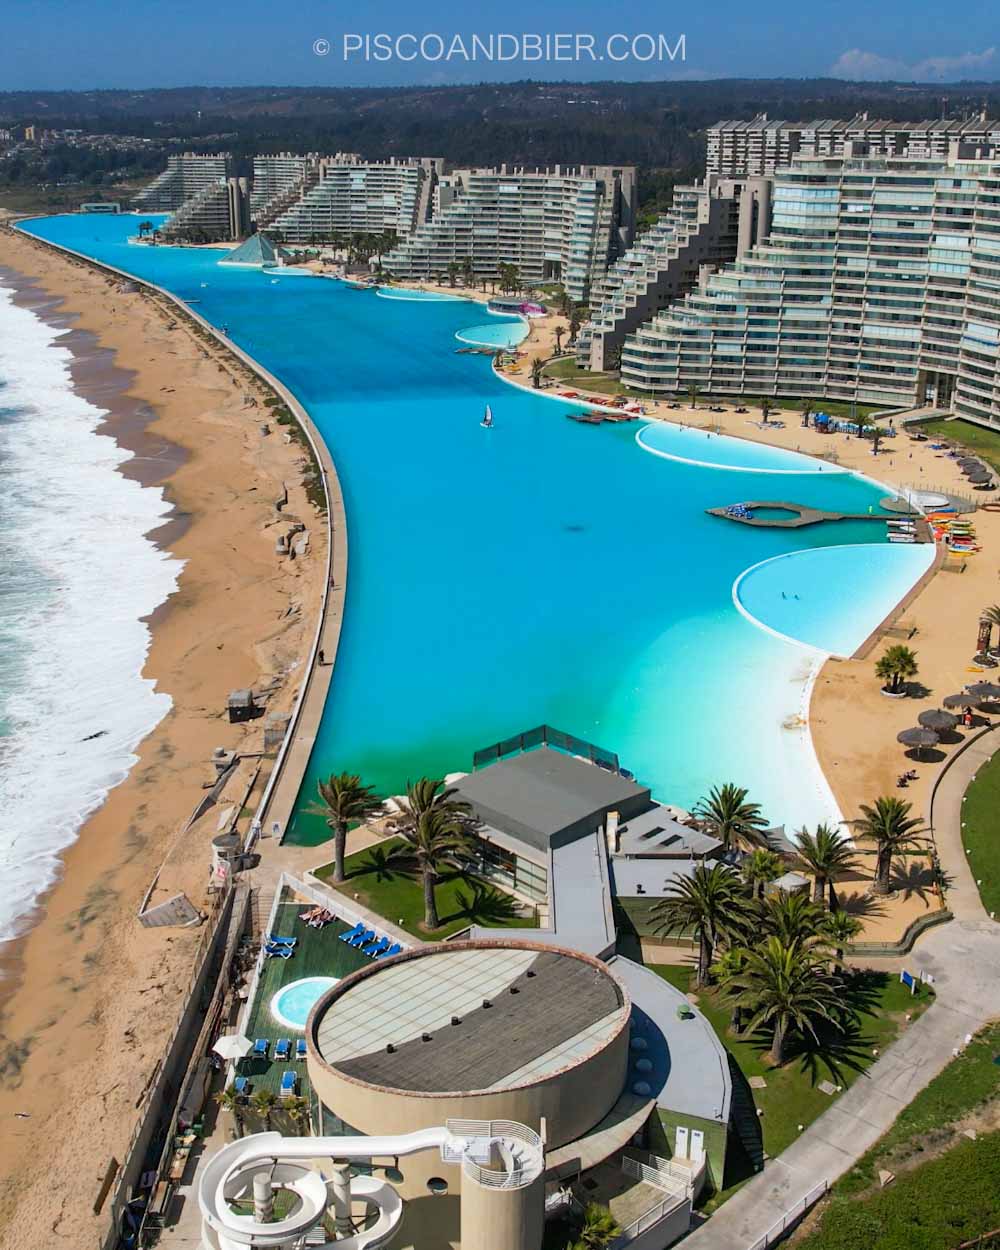 The World’s Largest Swimming Pool In Chile - San Alfonso Del Mar